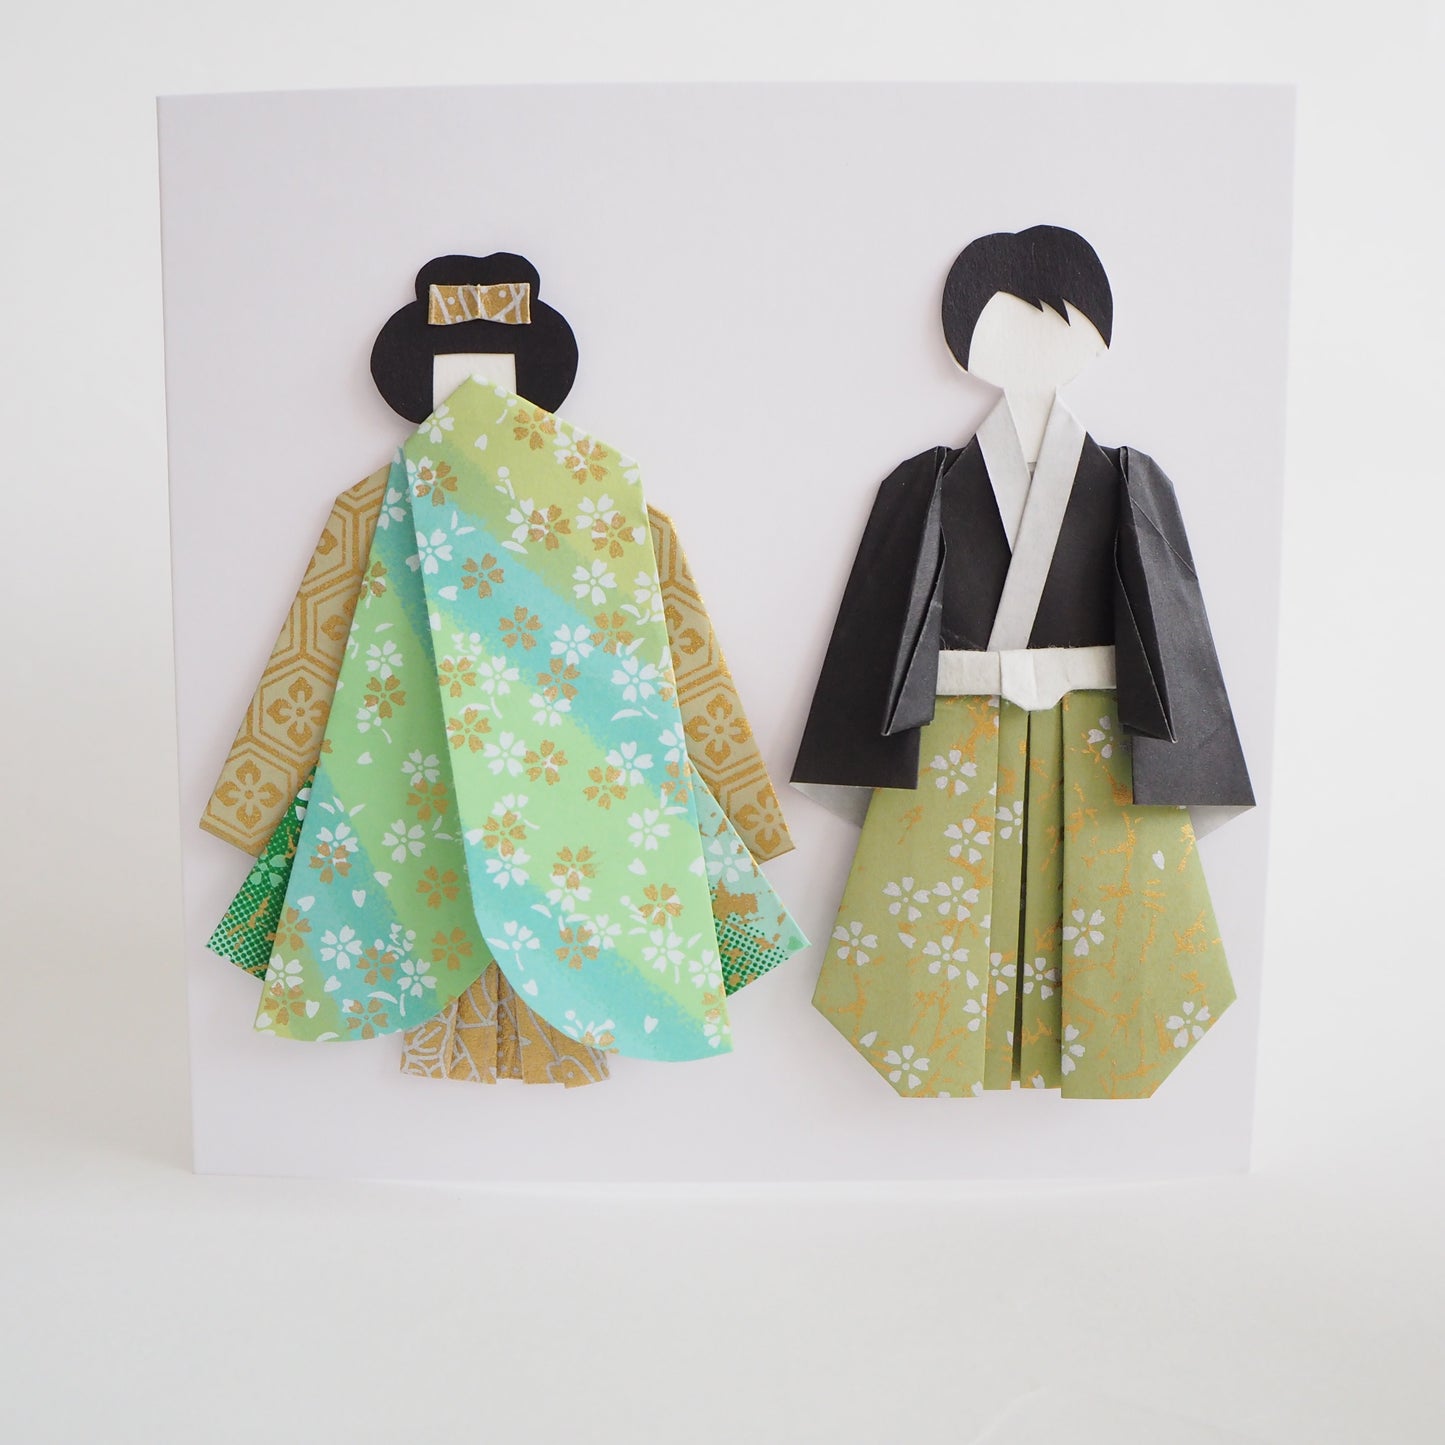 Customisable Handmade Origami Wedding Card - Green and Gold